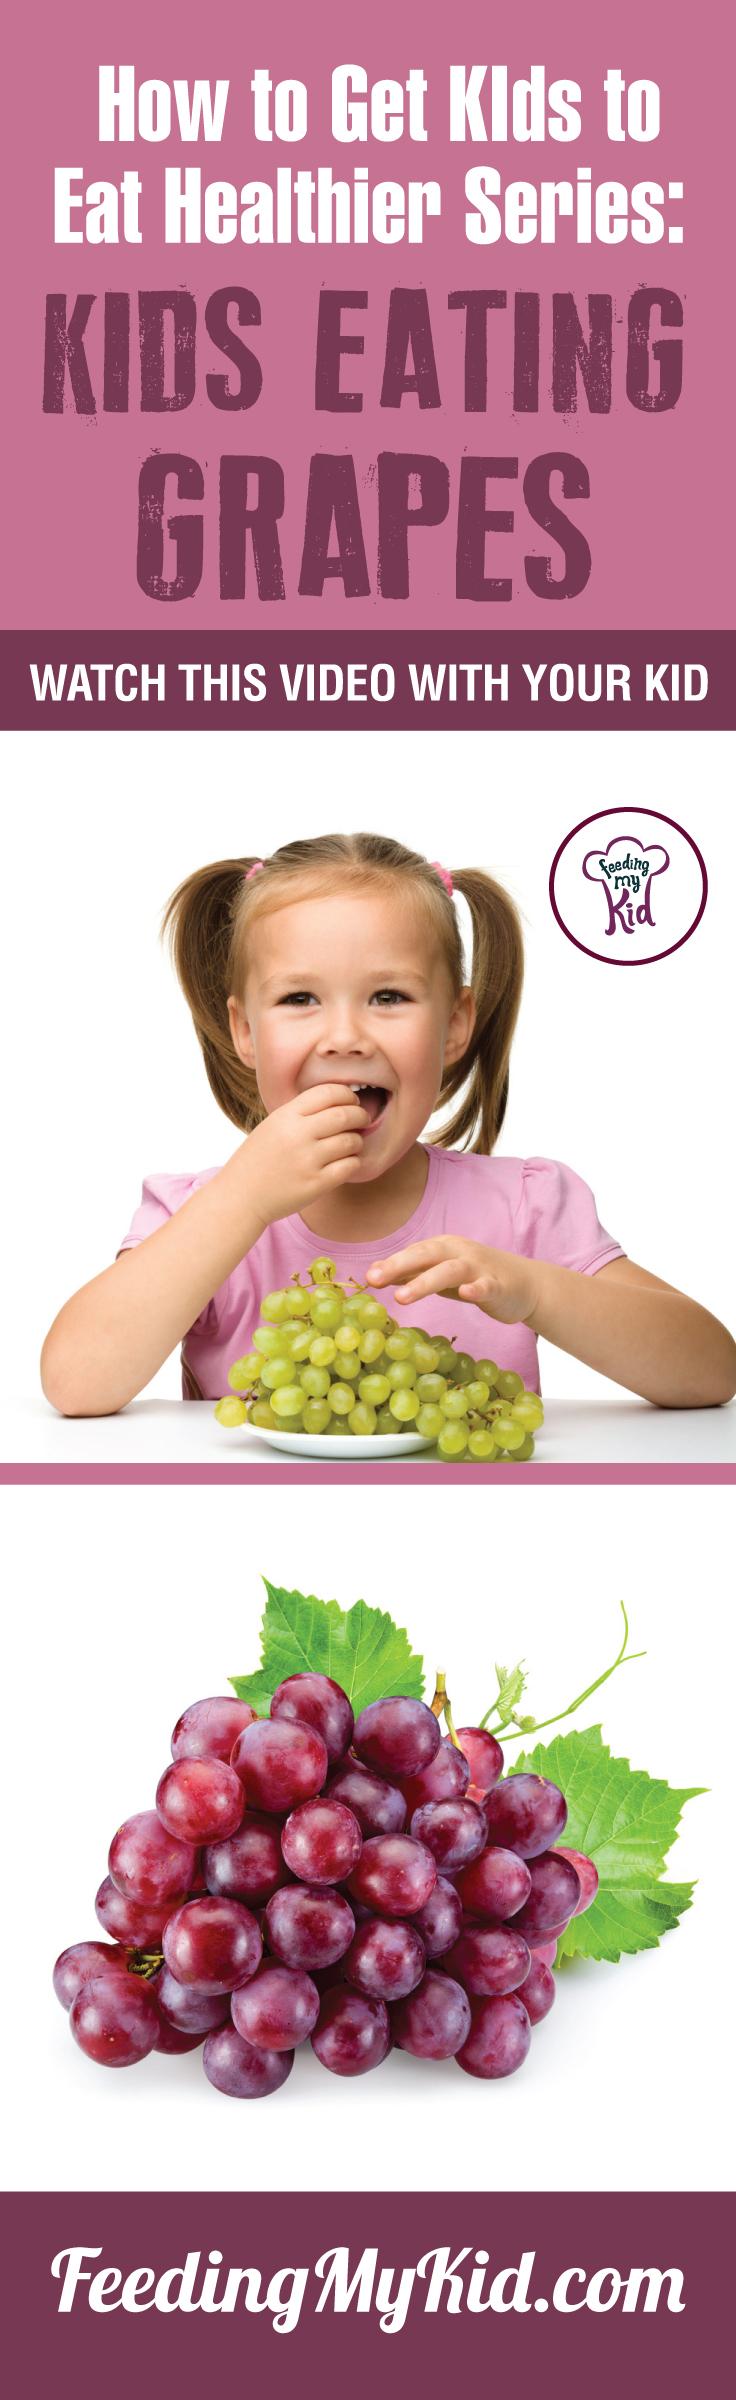 How to Get Kids to Eat Healthier Series: Kids Eating Grapes